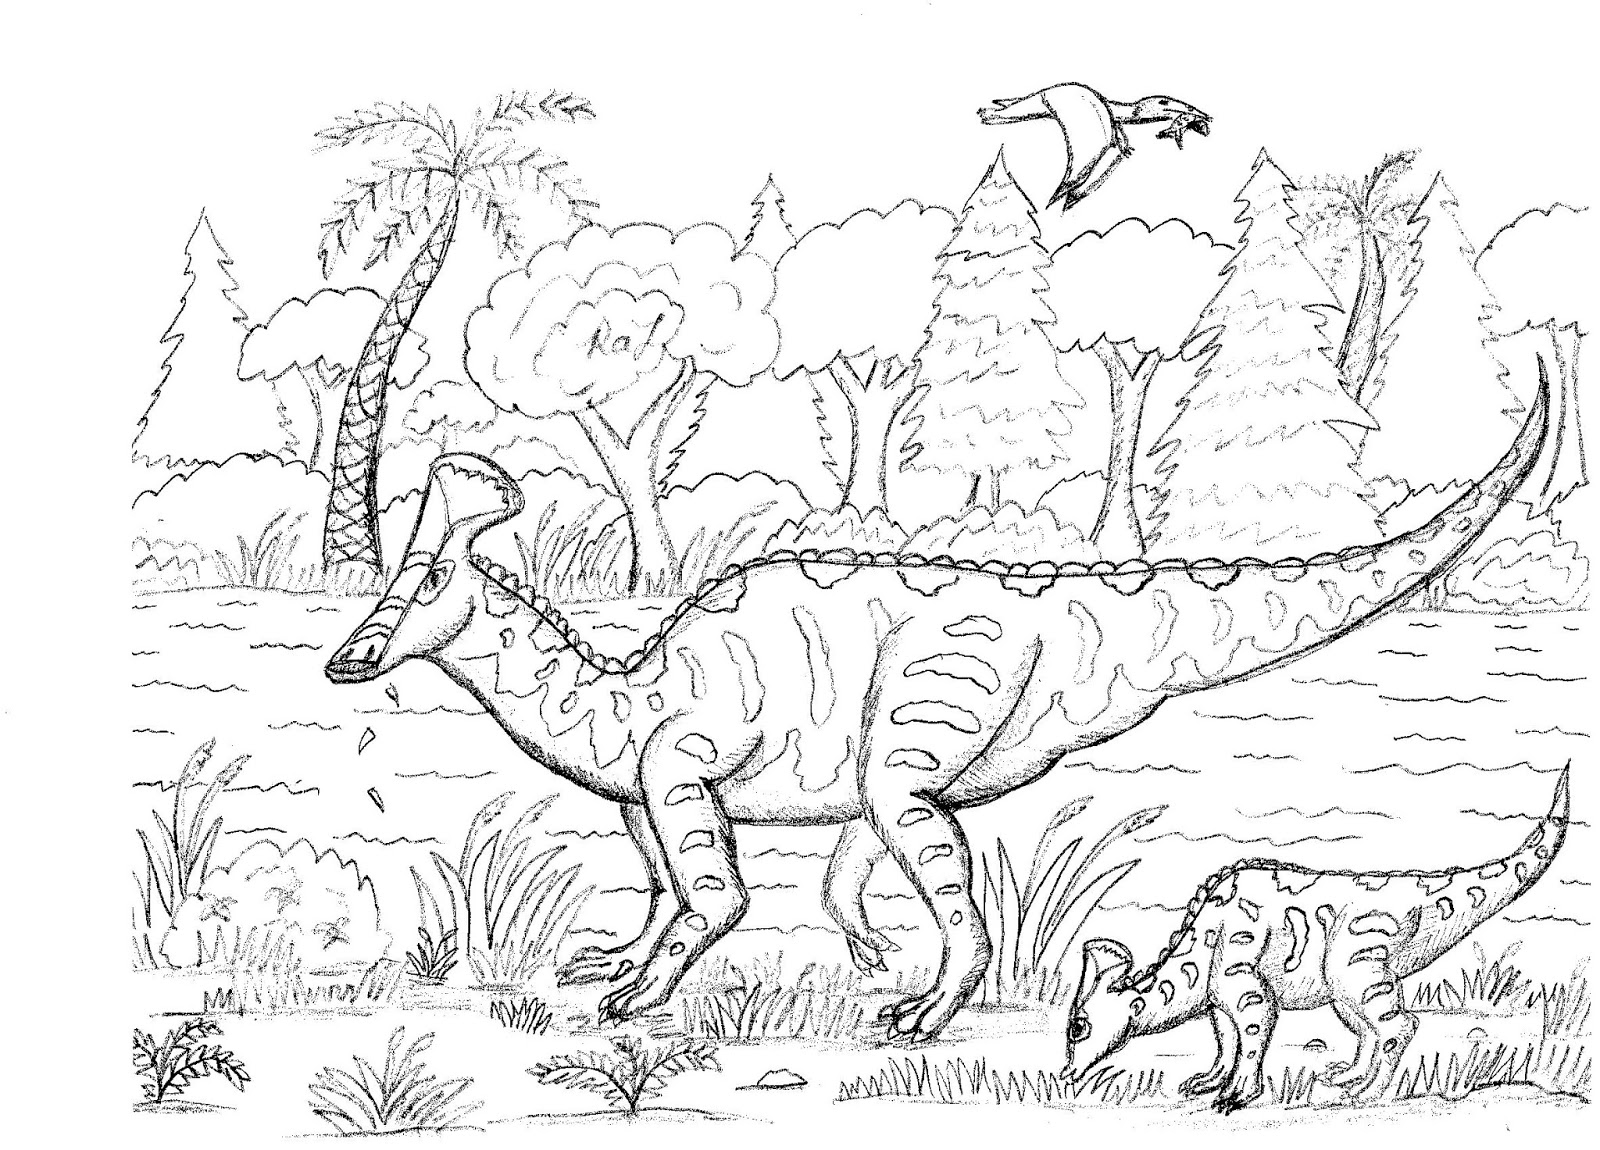 Robin S Great Coloring Pages Olorotitan The Duck Billed Dinosaur From Russia Lambeosaurus Coloring Page